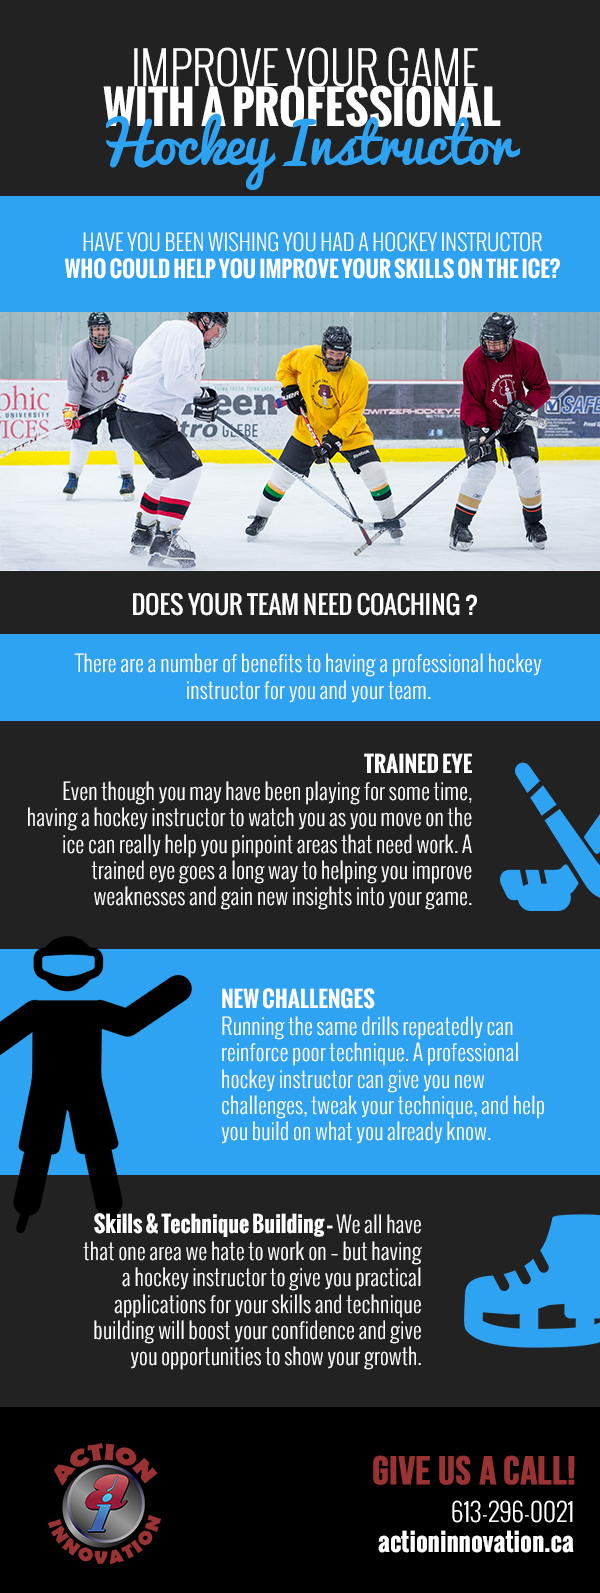 Improve Your Game with a Professional Hockey Instructor